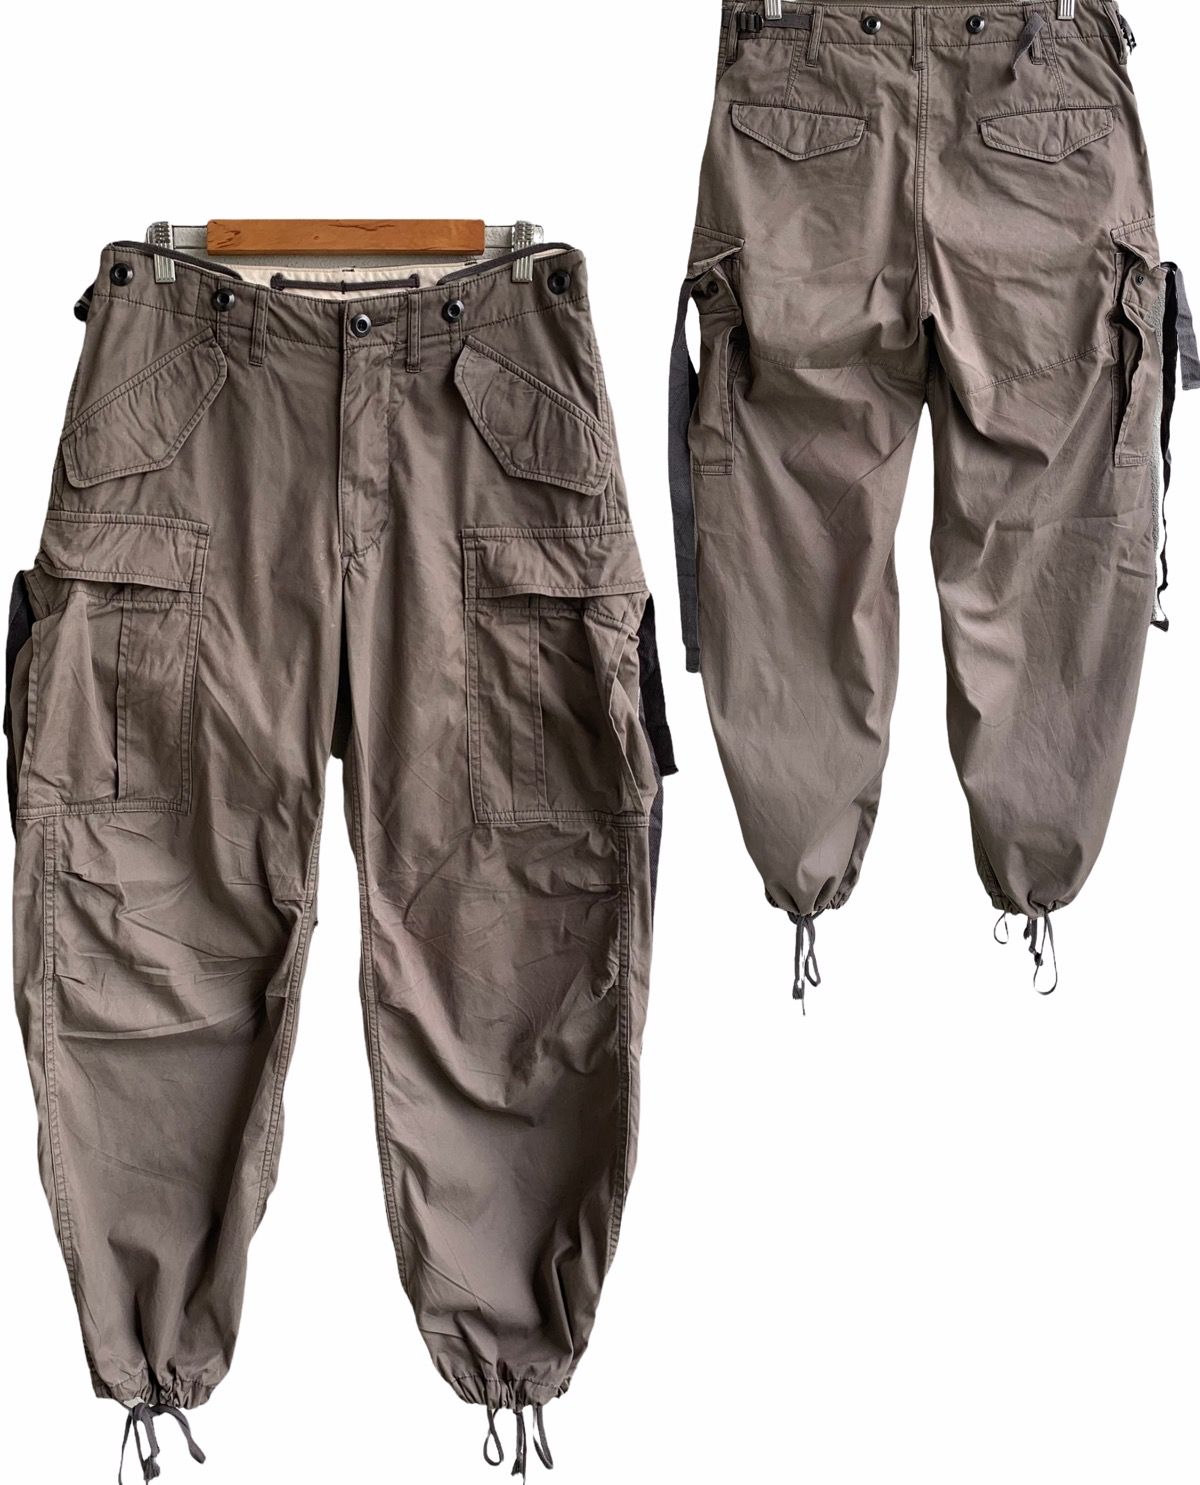 00s ARCHIVE】grunge gimmick cargo pants